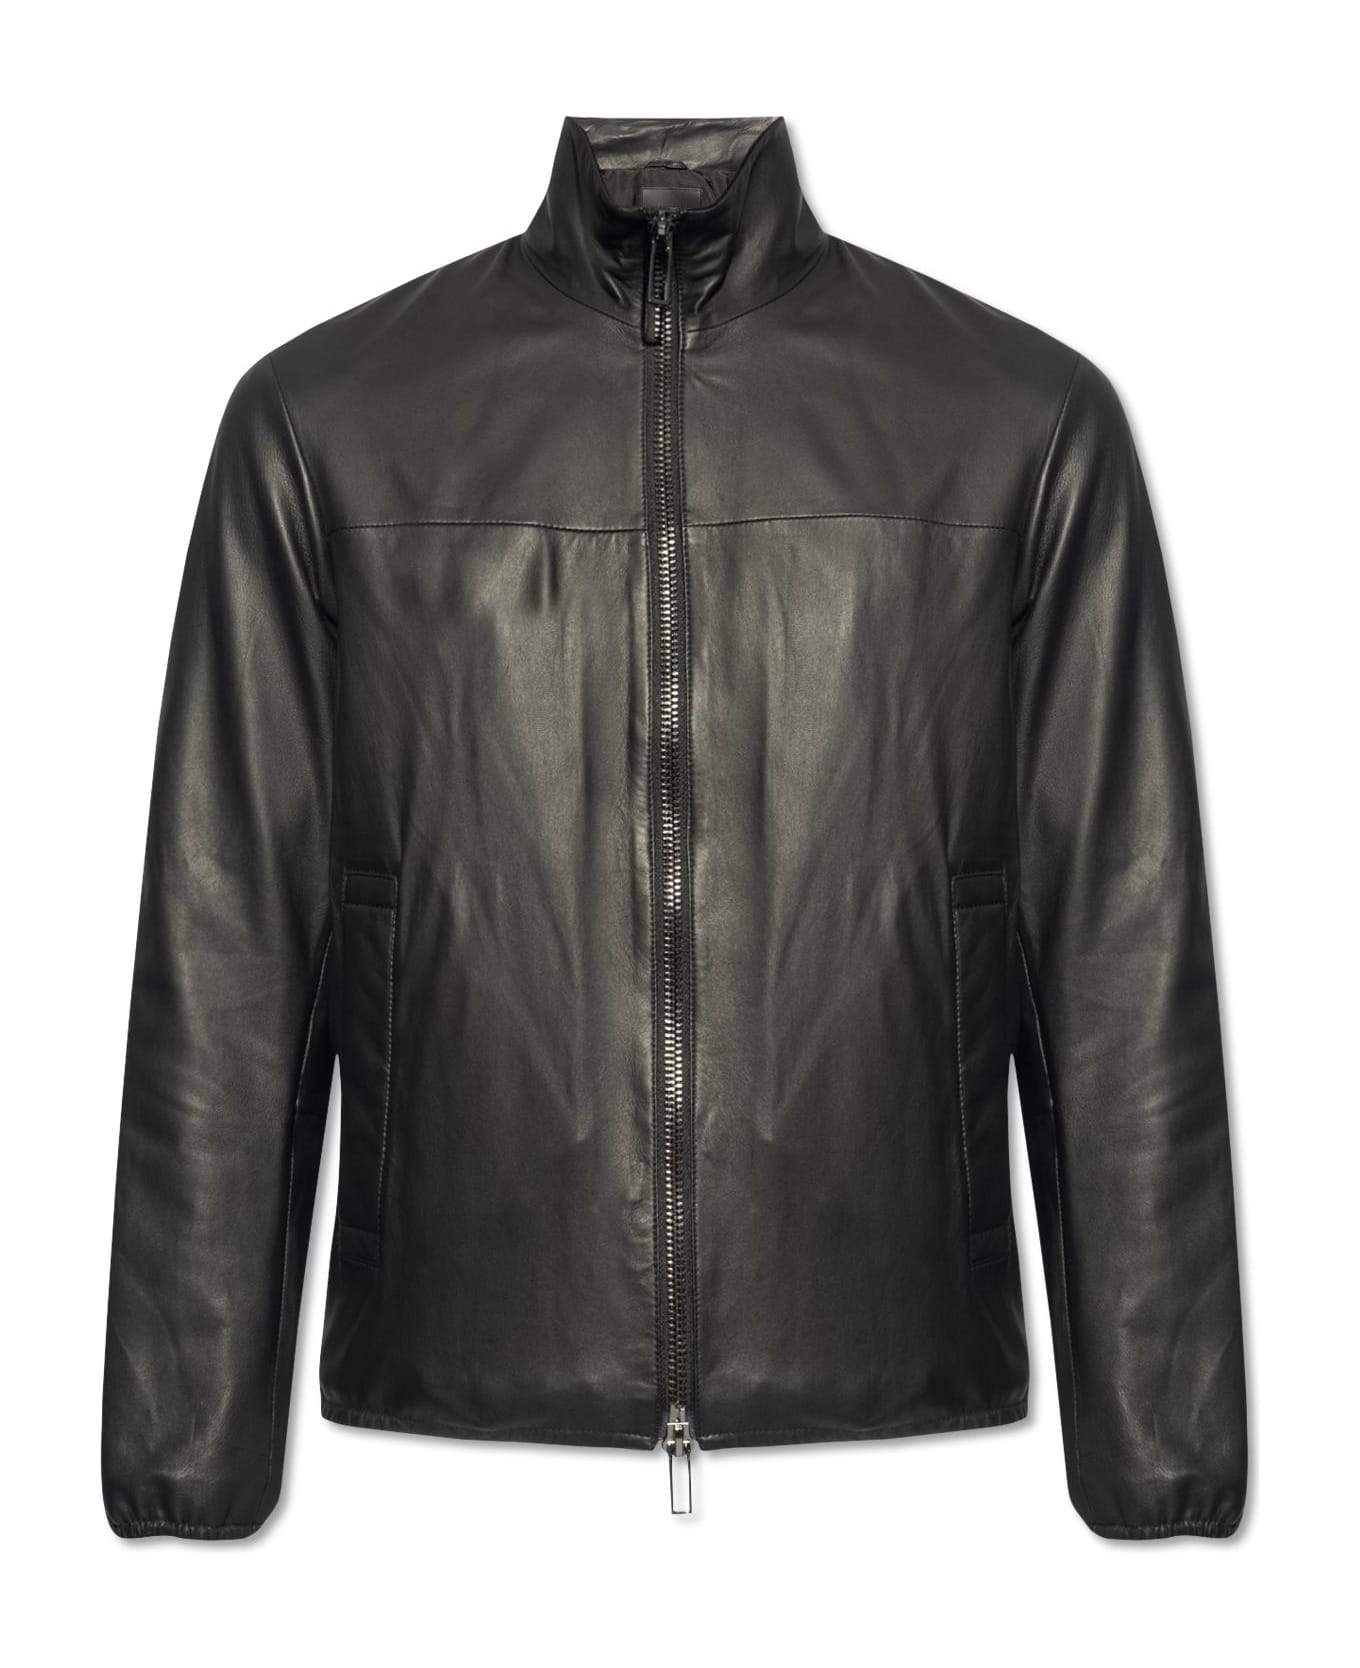 Emporio Armani Leather Jacket With Stand-up Collar - Nero レザージャケット